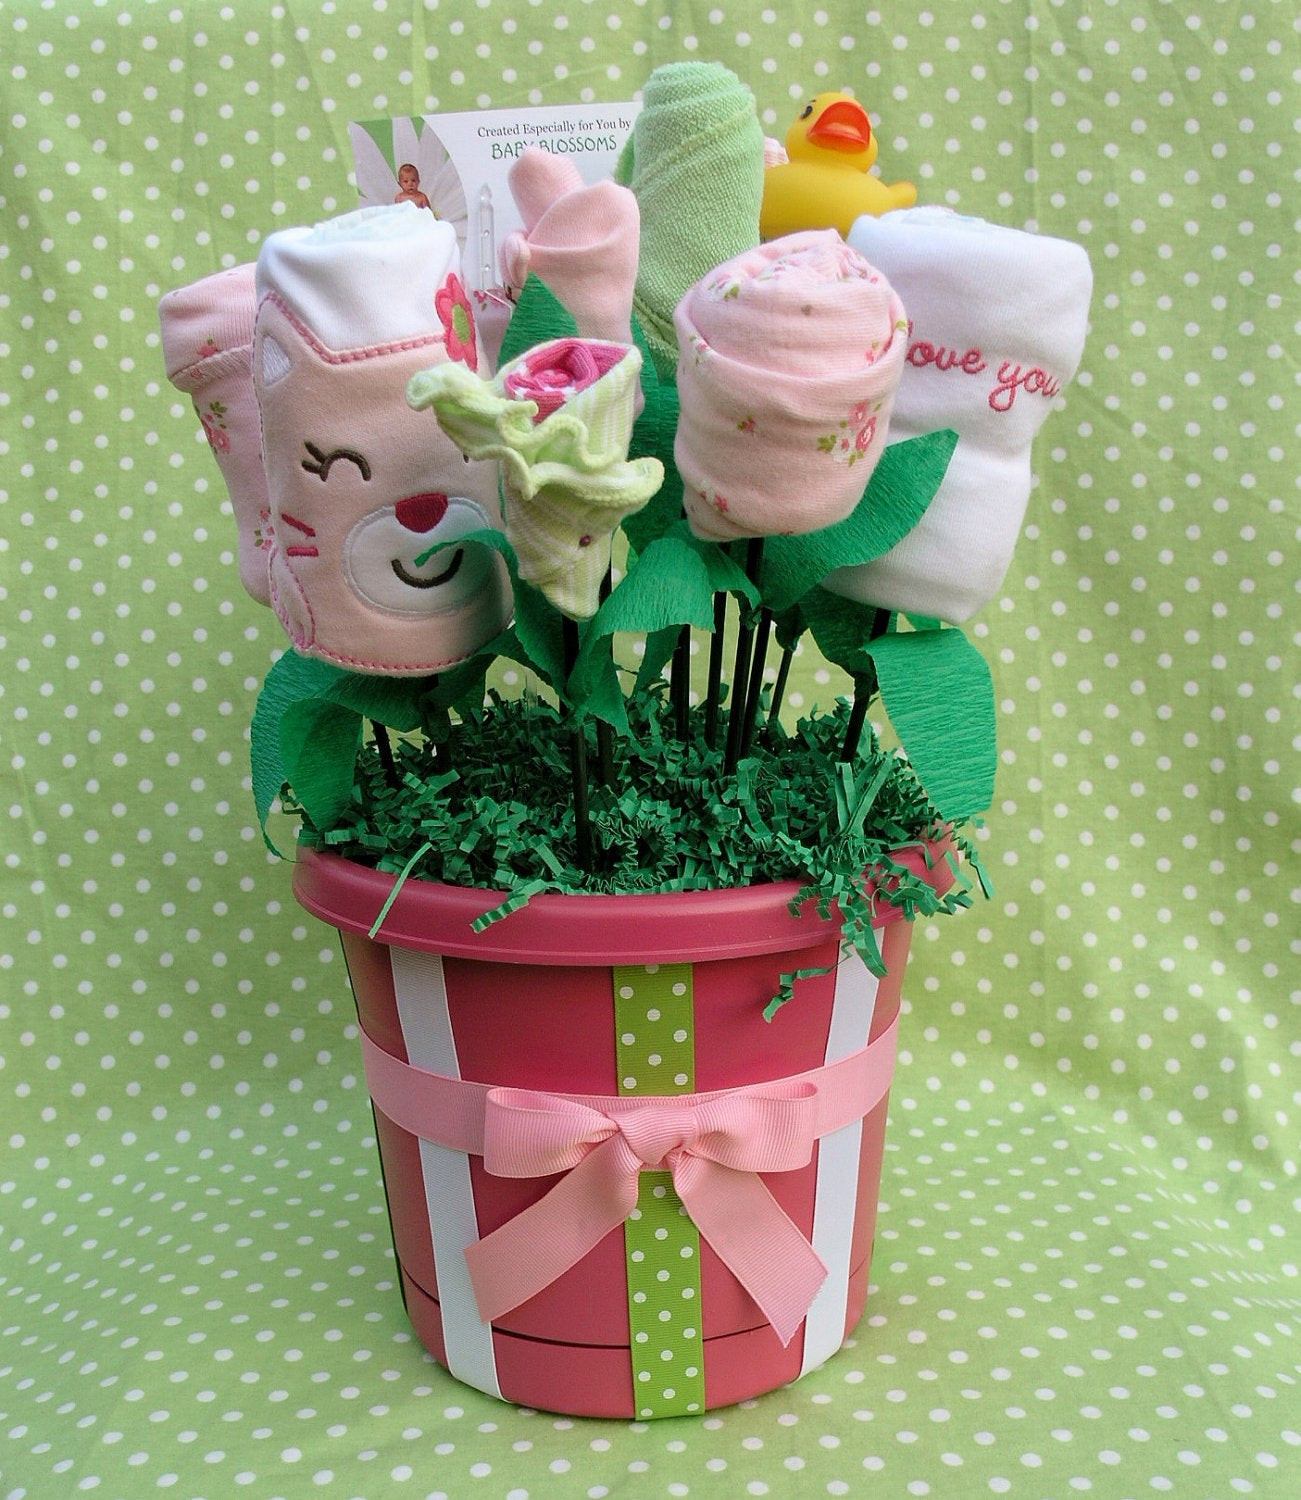 Personal Baby Shower Gift Ideas
 Baby Shower Gift Basket for Newborn Girl Unique by